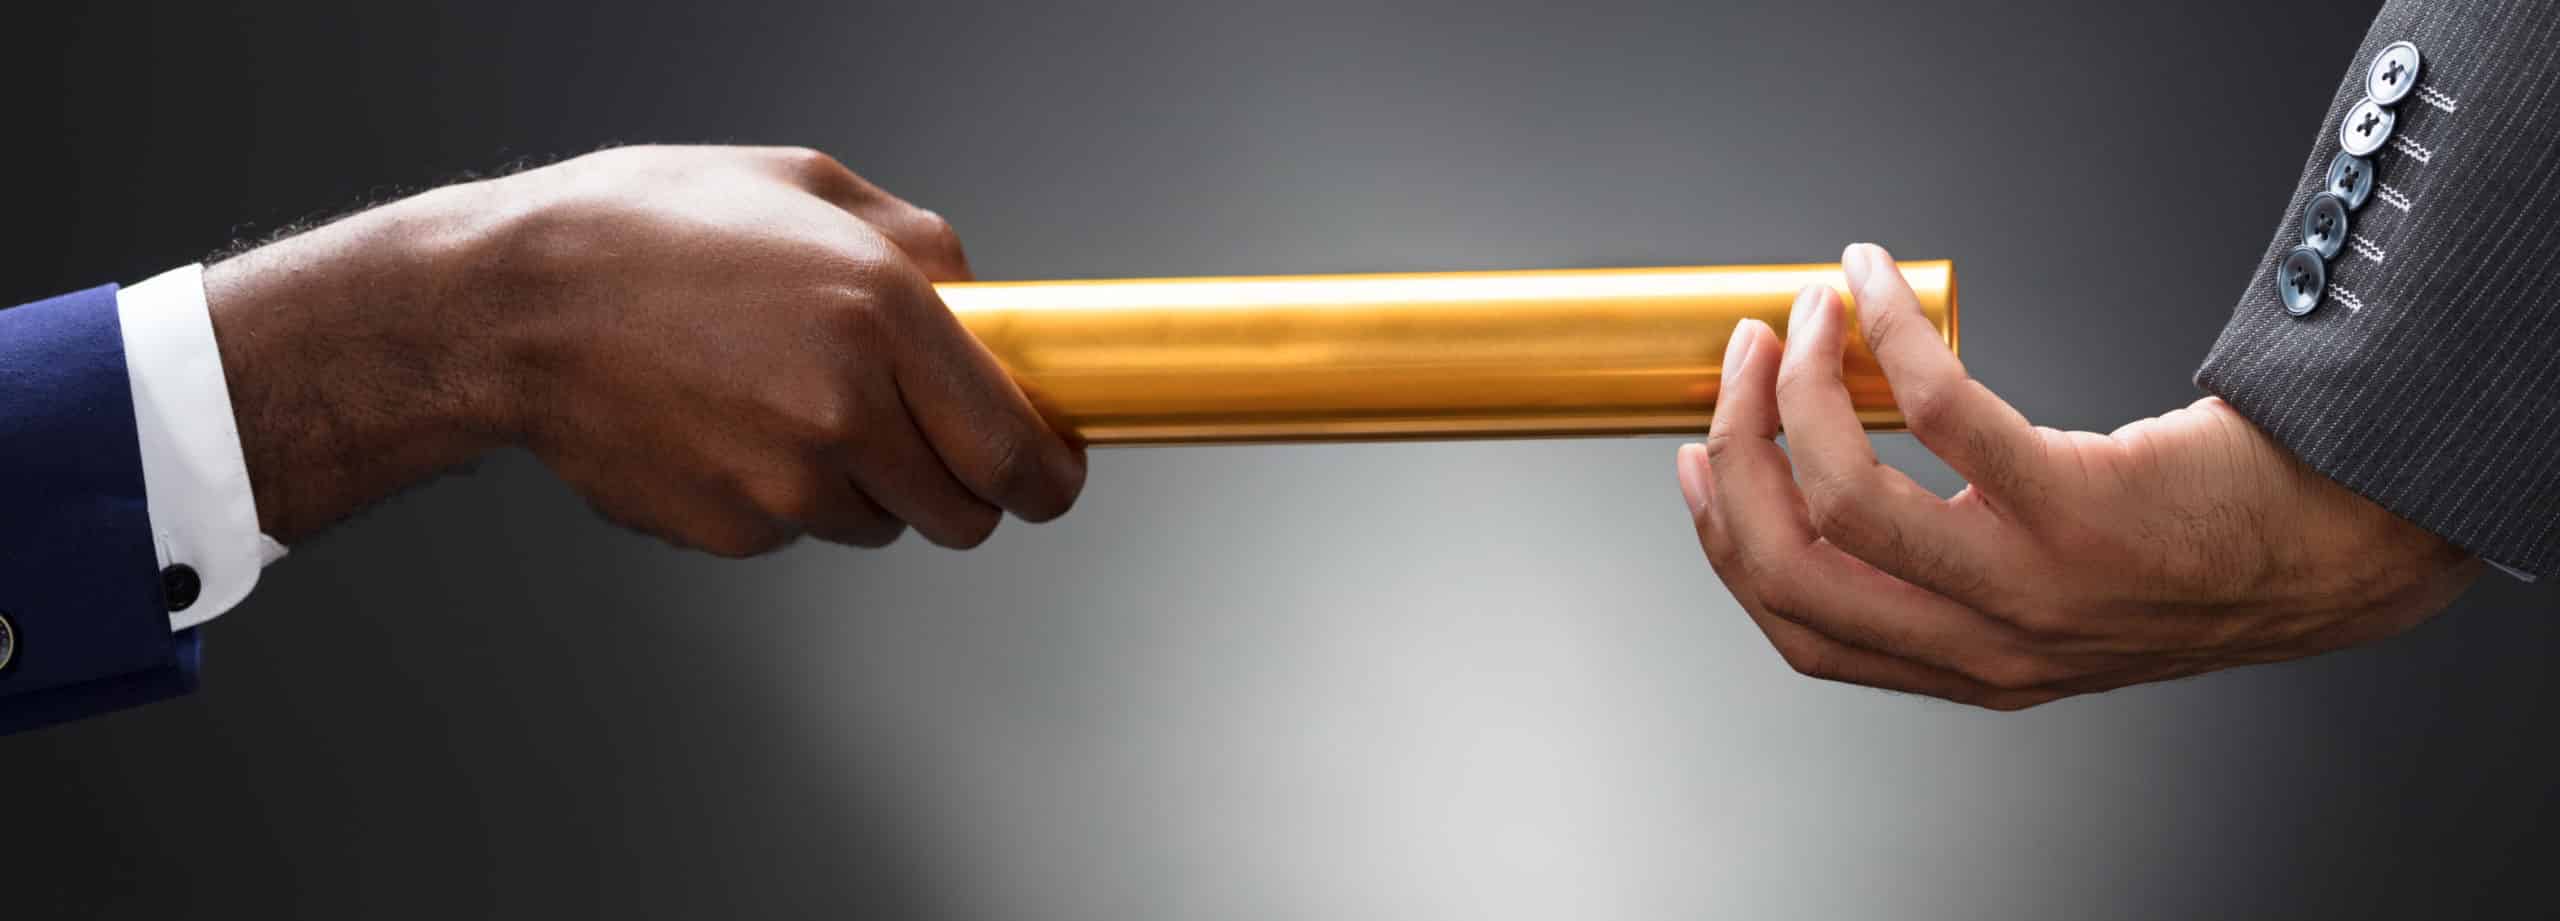 Image of one person passing a baton to another on PSA Financial's website